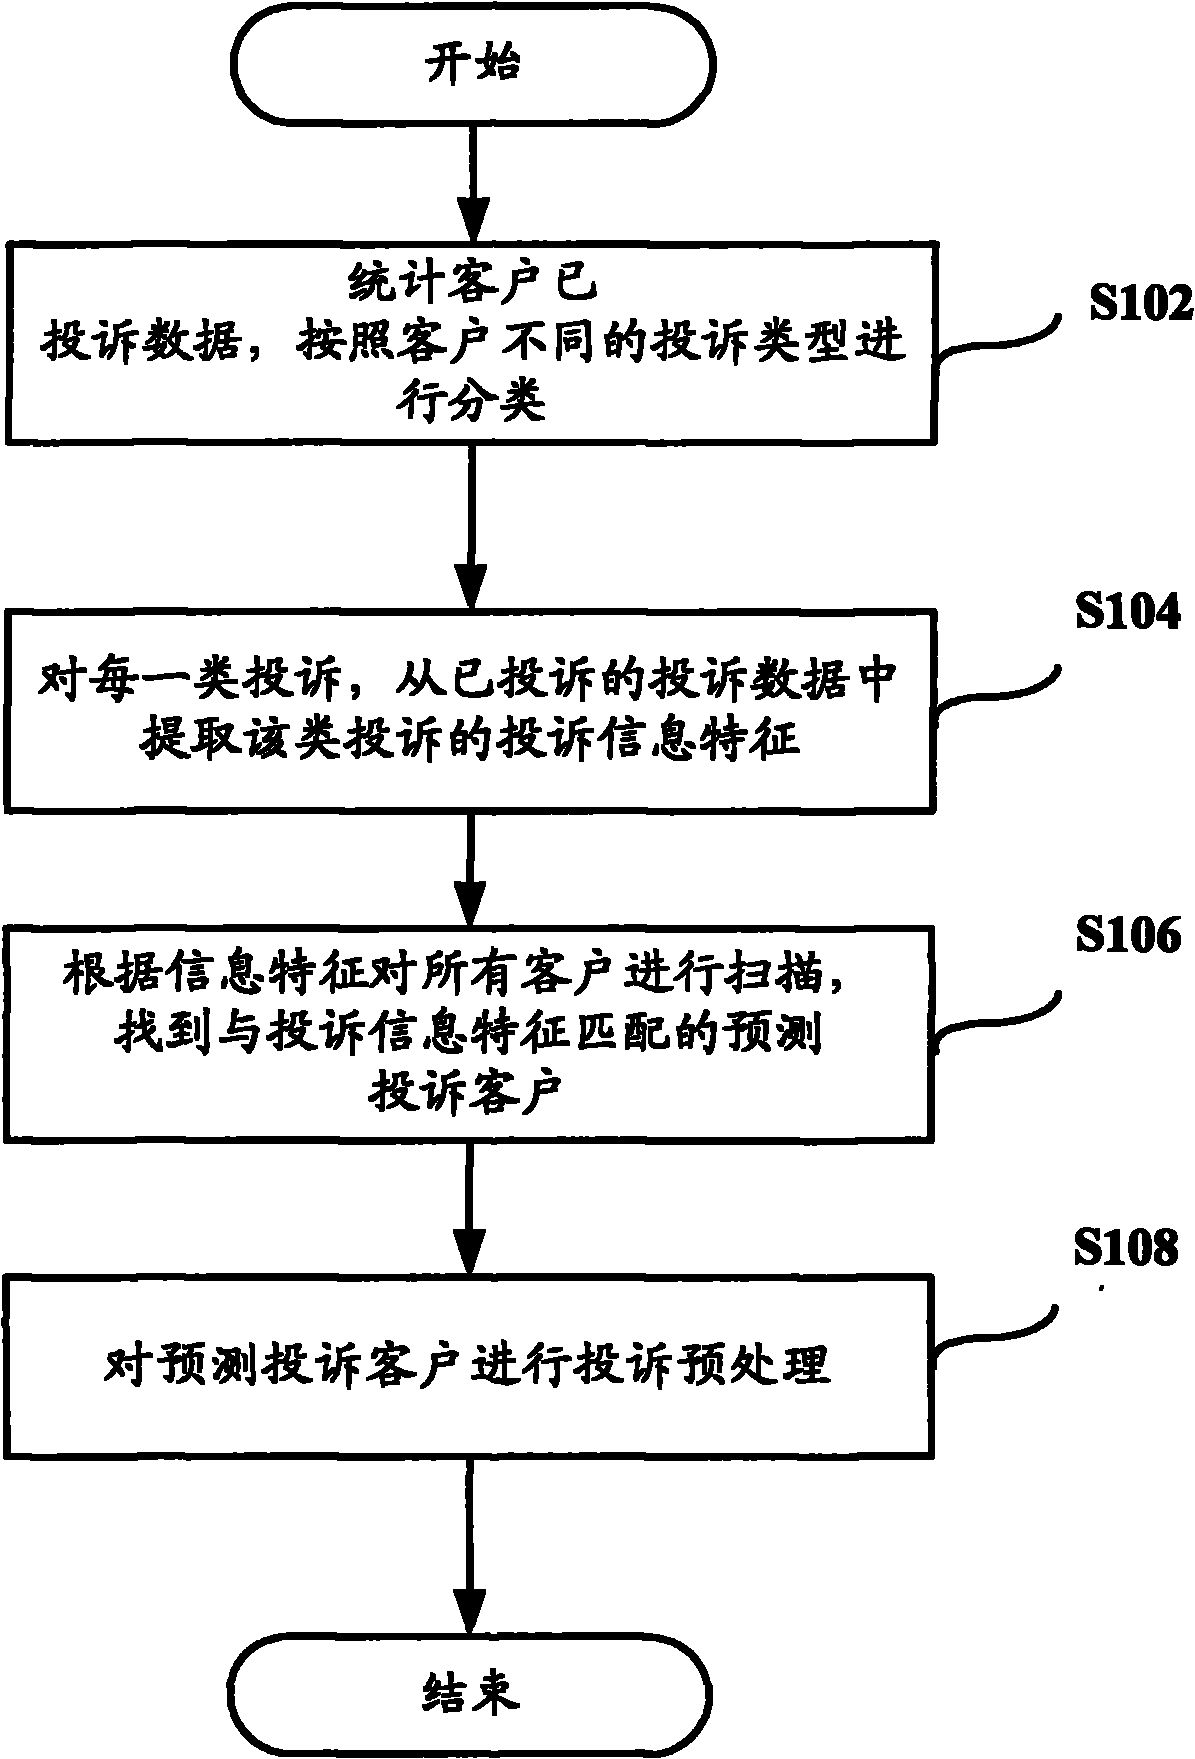 Complaint pre-treatment method as well as complaint treatment method, device and system